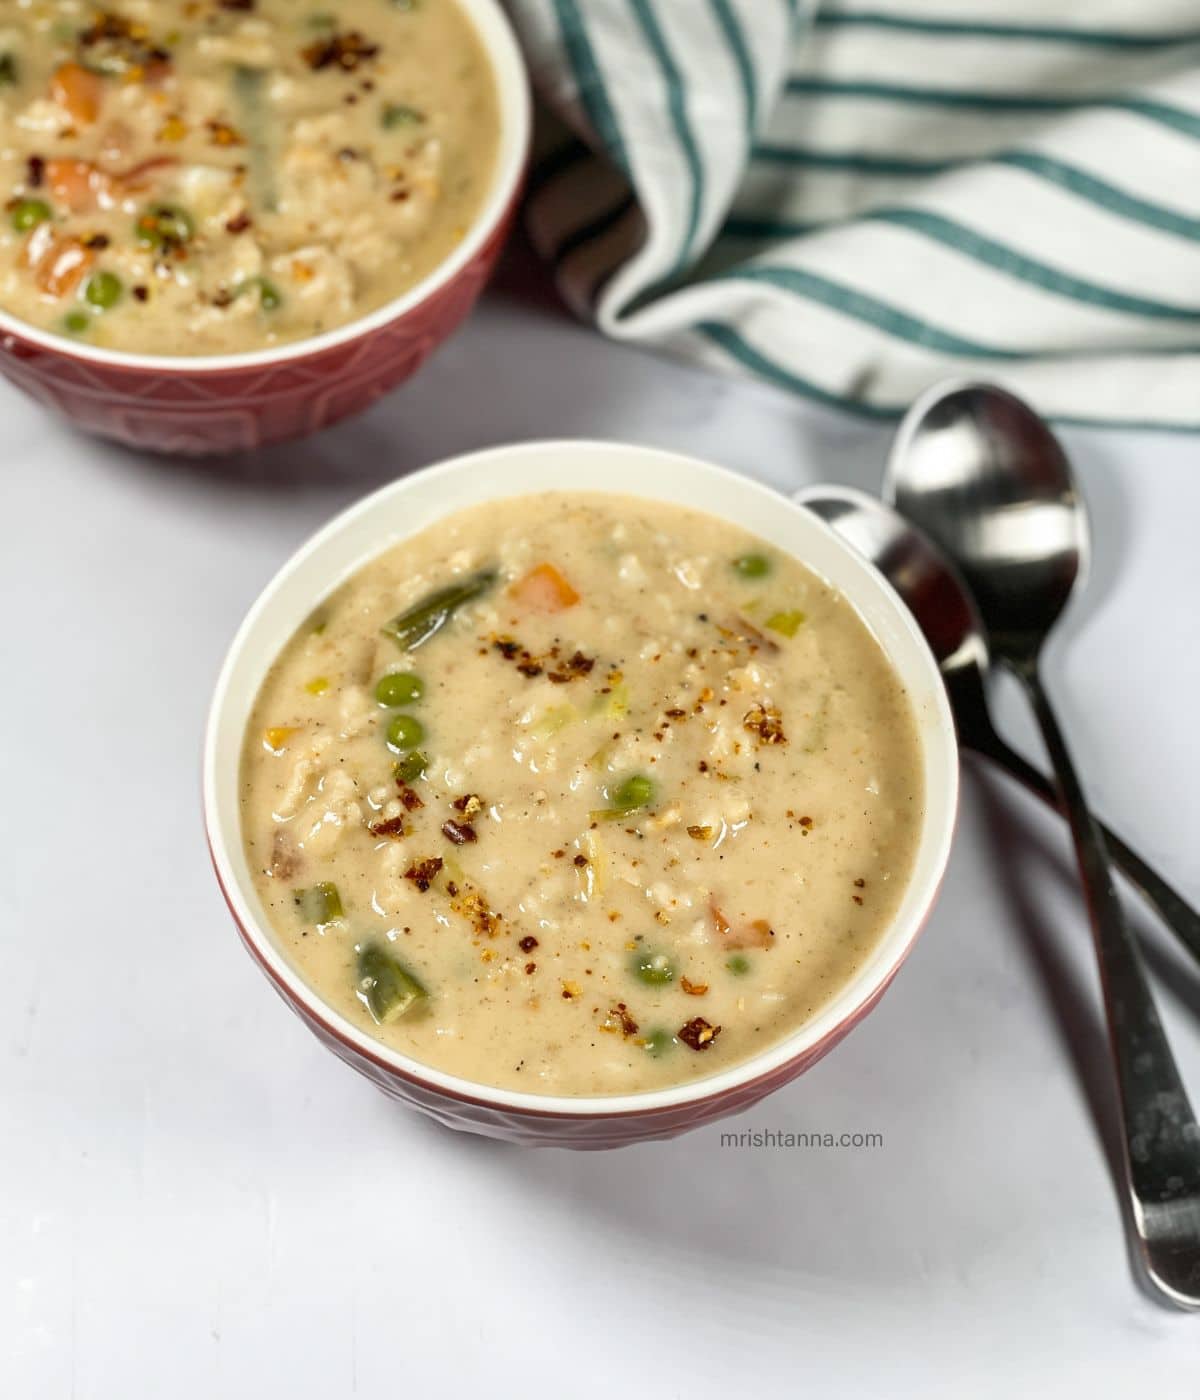 Two bowls of oatmeal soup are on the table.